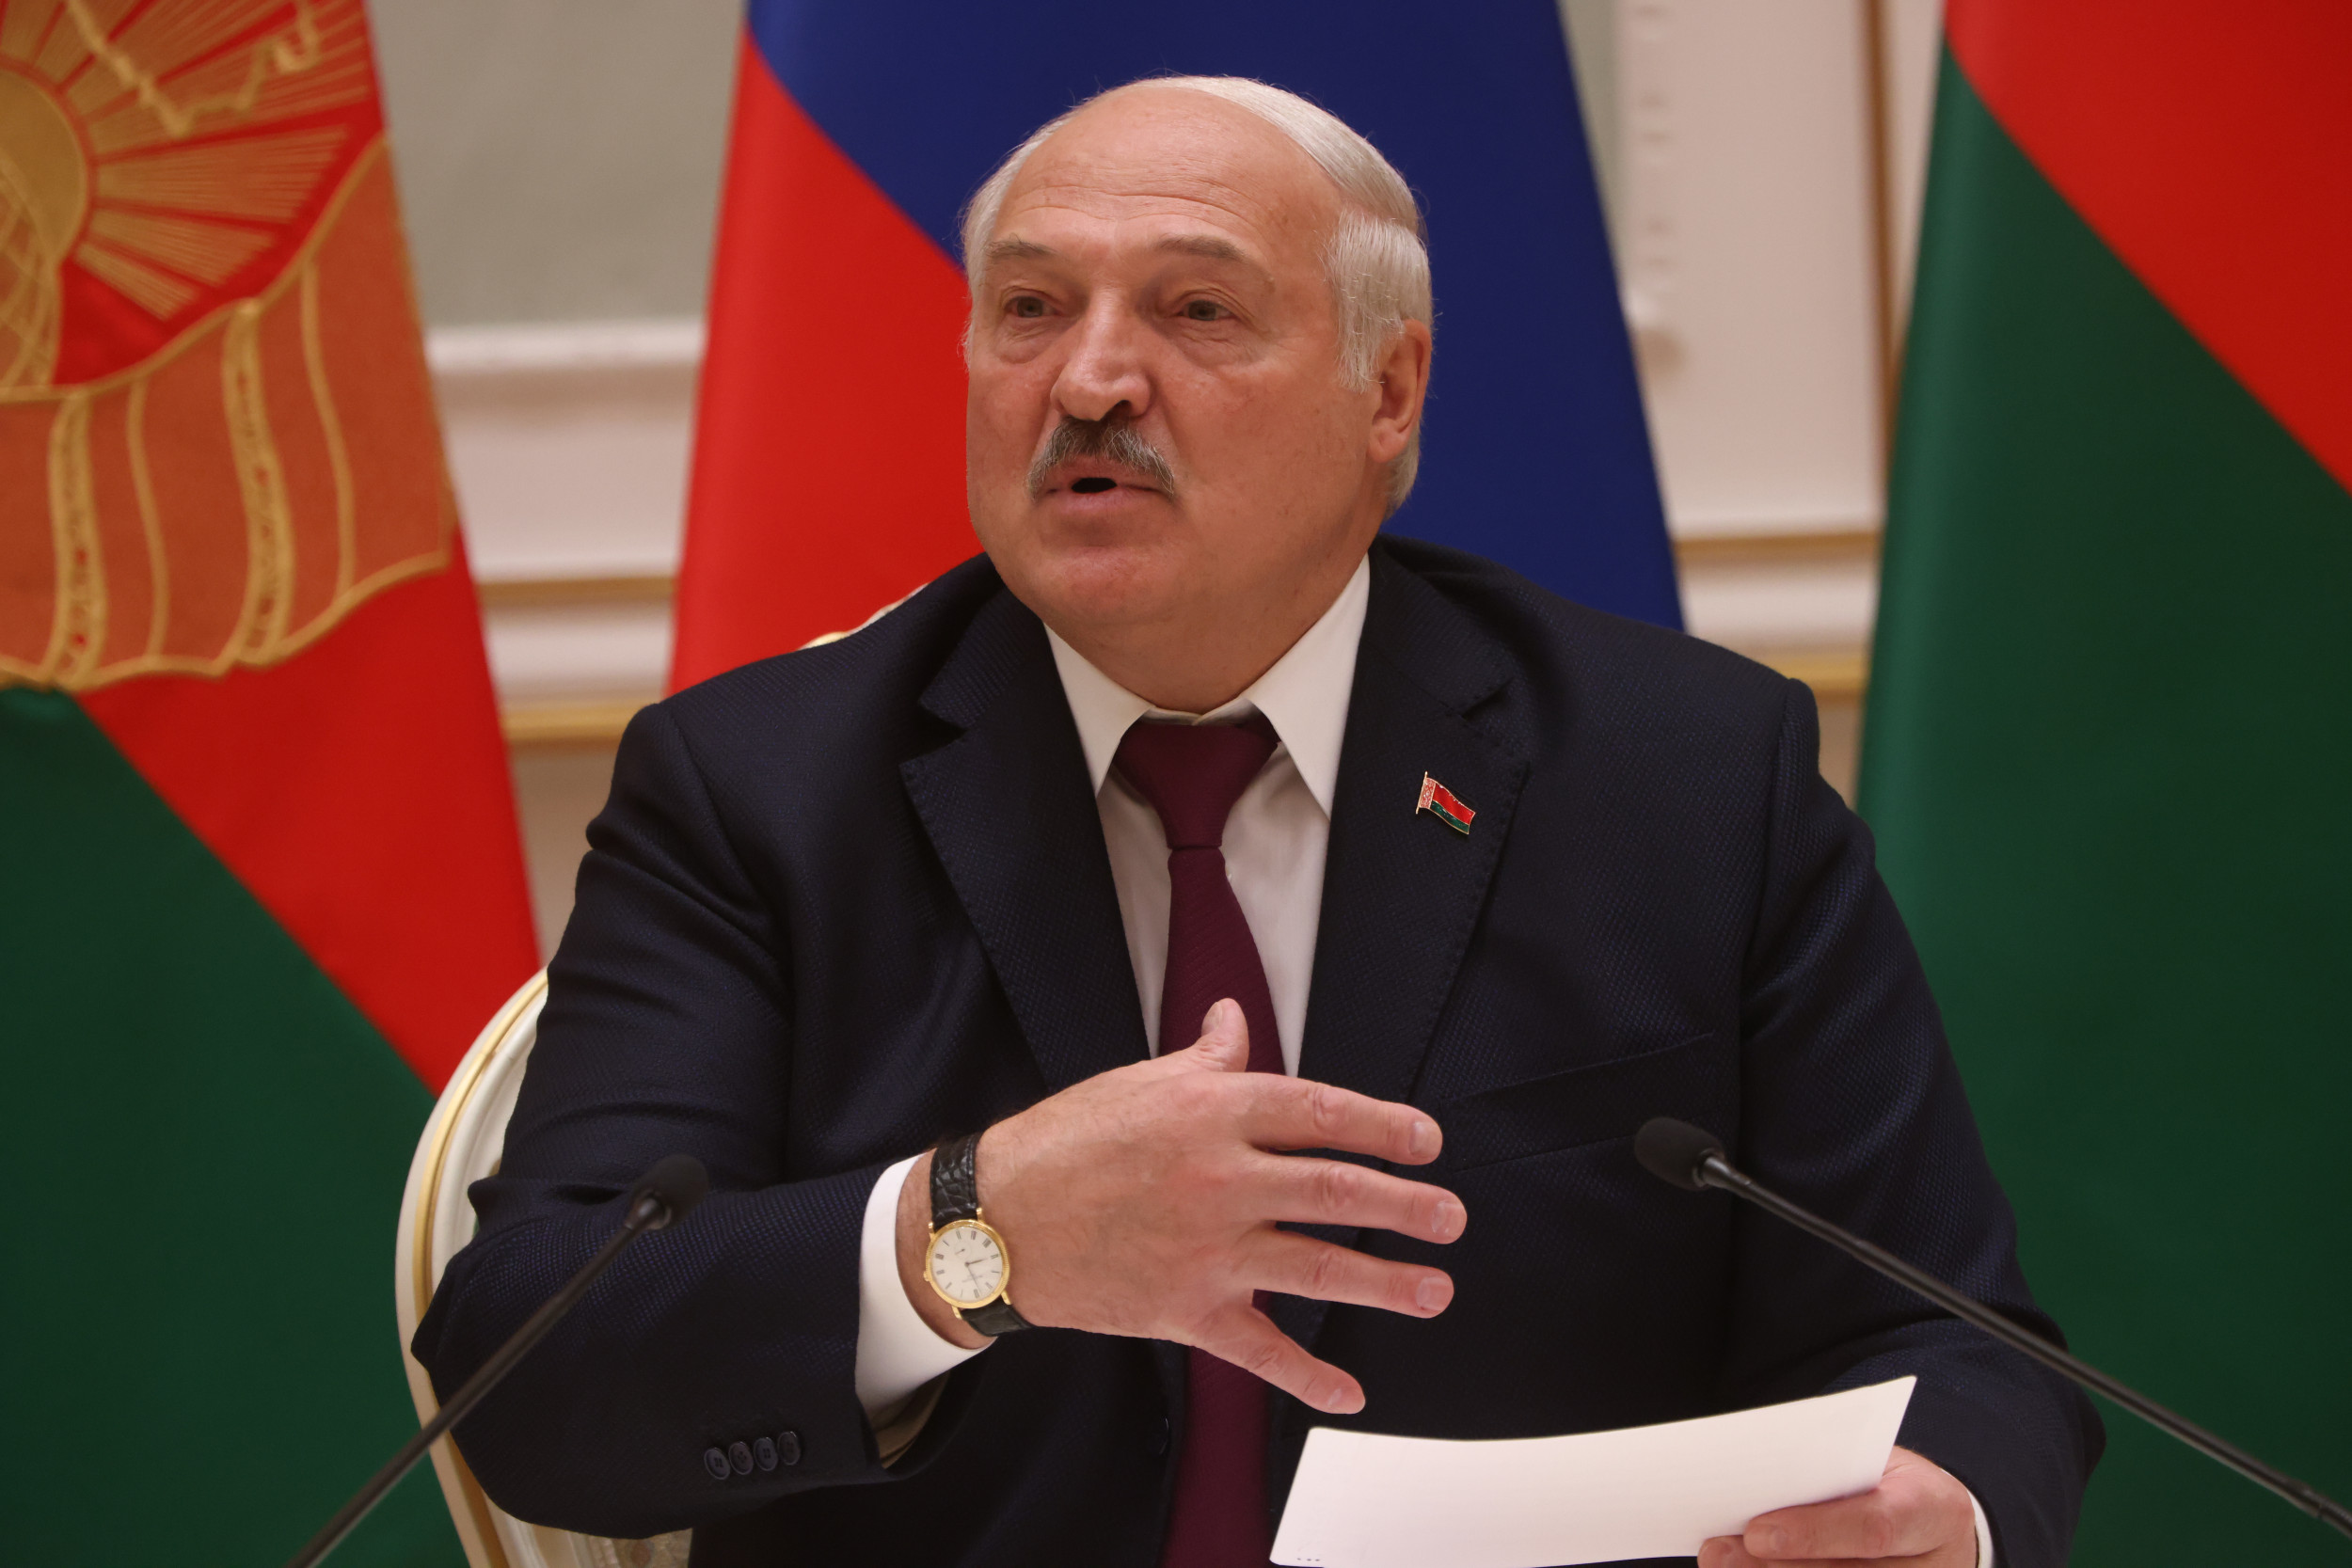 Lukashenko Gives Russian Space Chief Pork Fat as Gift